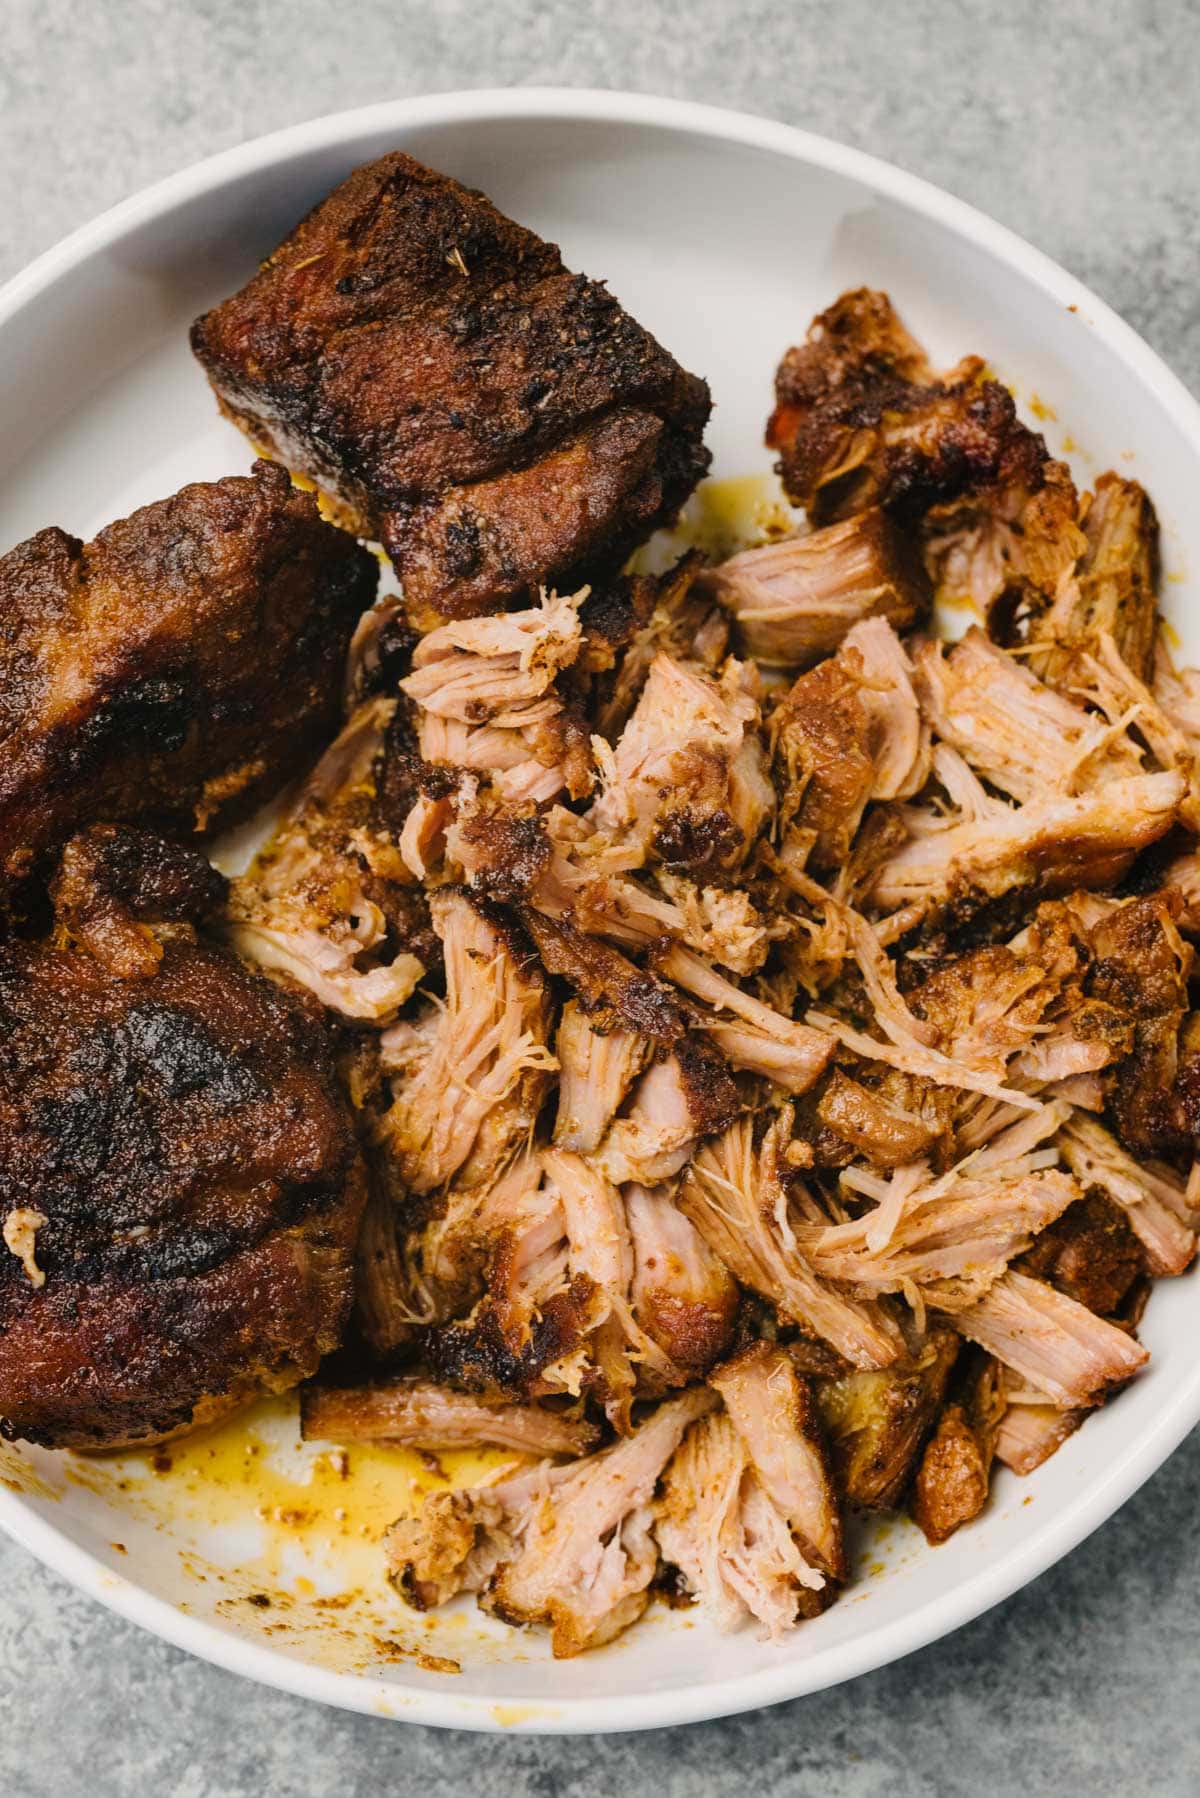 Partially shredded pulled pork in a large shallow white bowl.